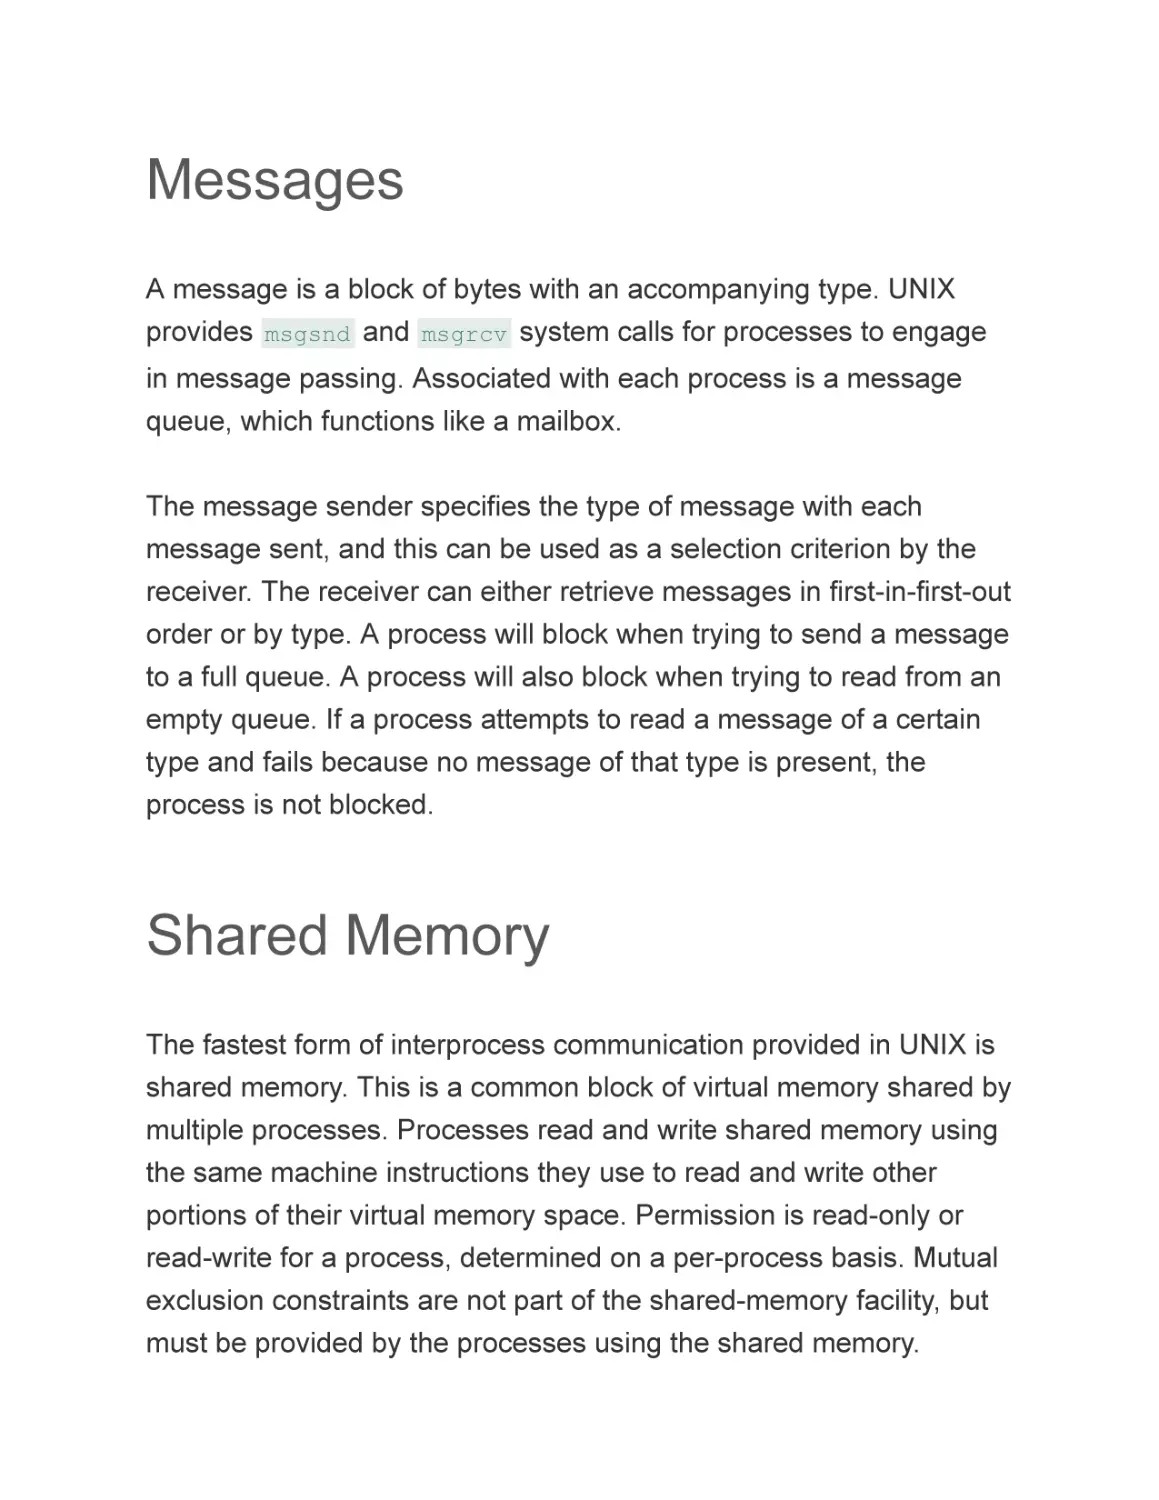 Messages
Shared Memory